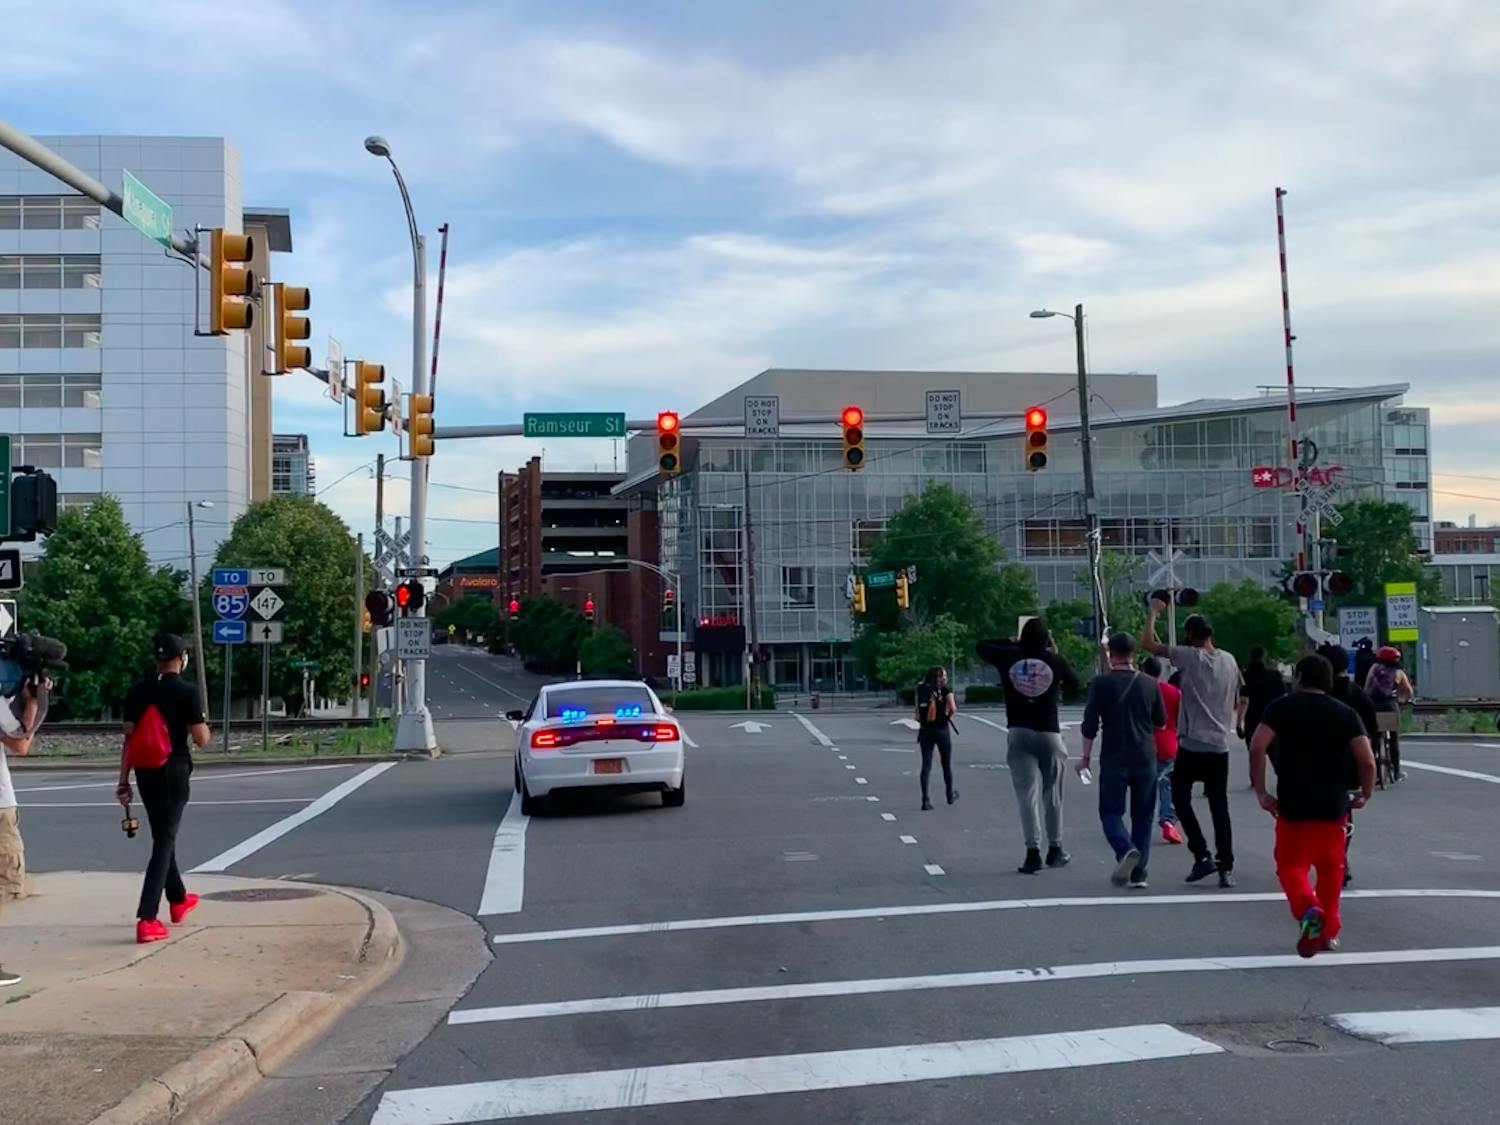 Protestors walk through downtown Durham with a police vehicle in the street on Monday, June 1, 2020.